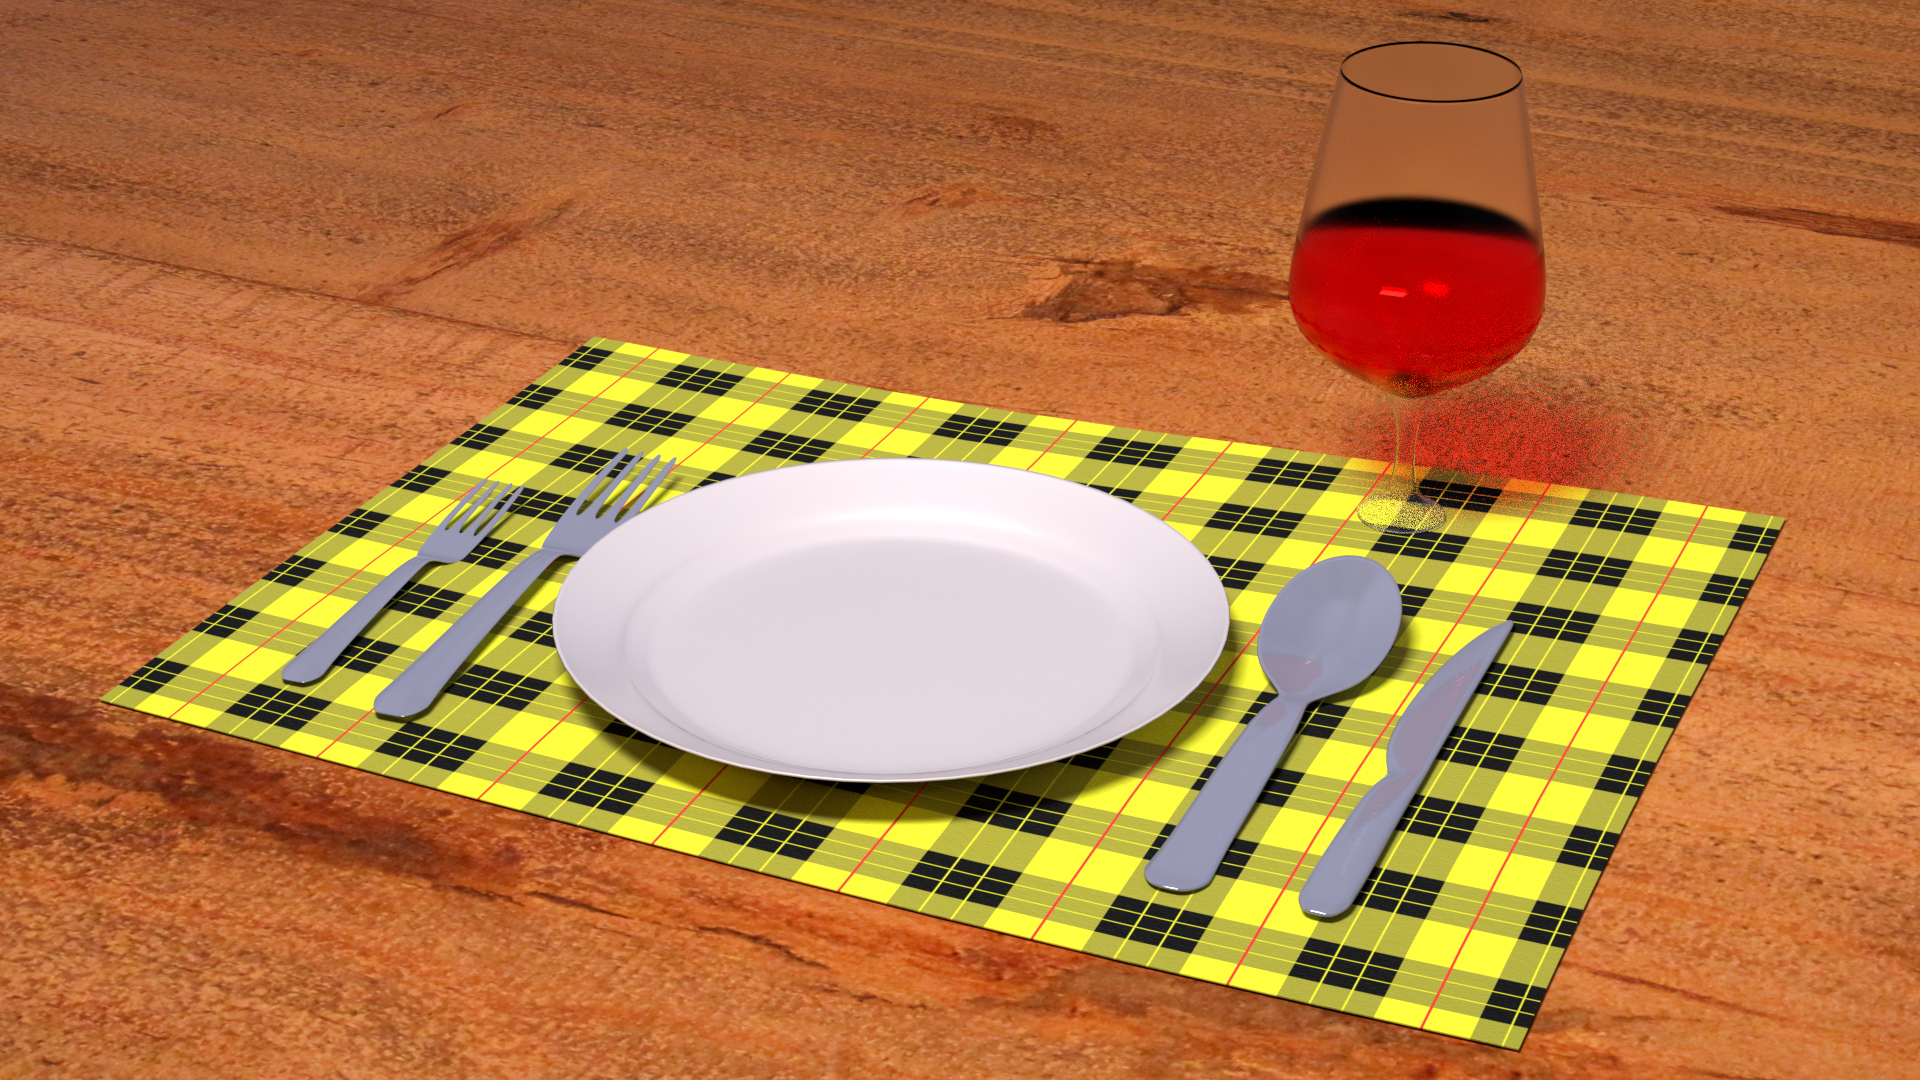 Overview of the table setting scene